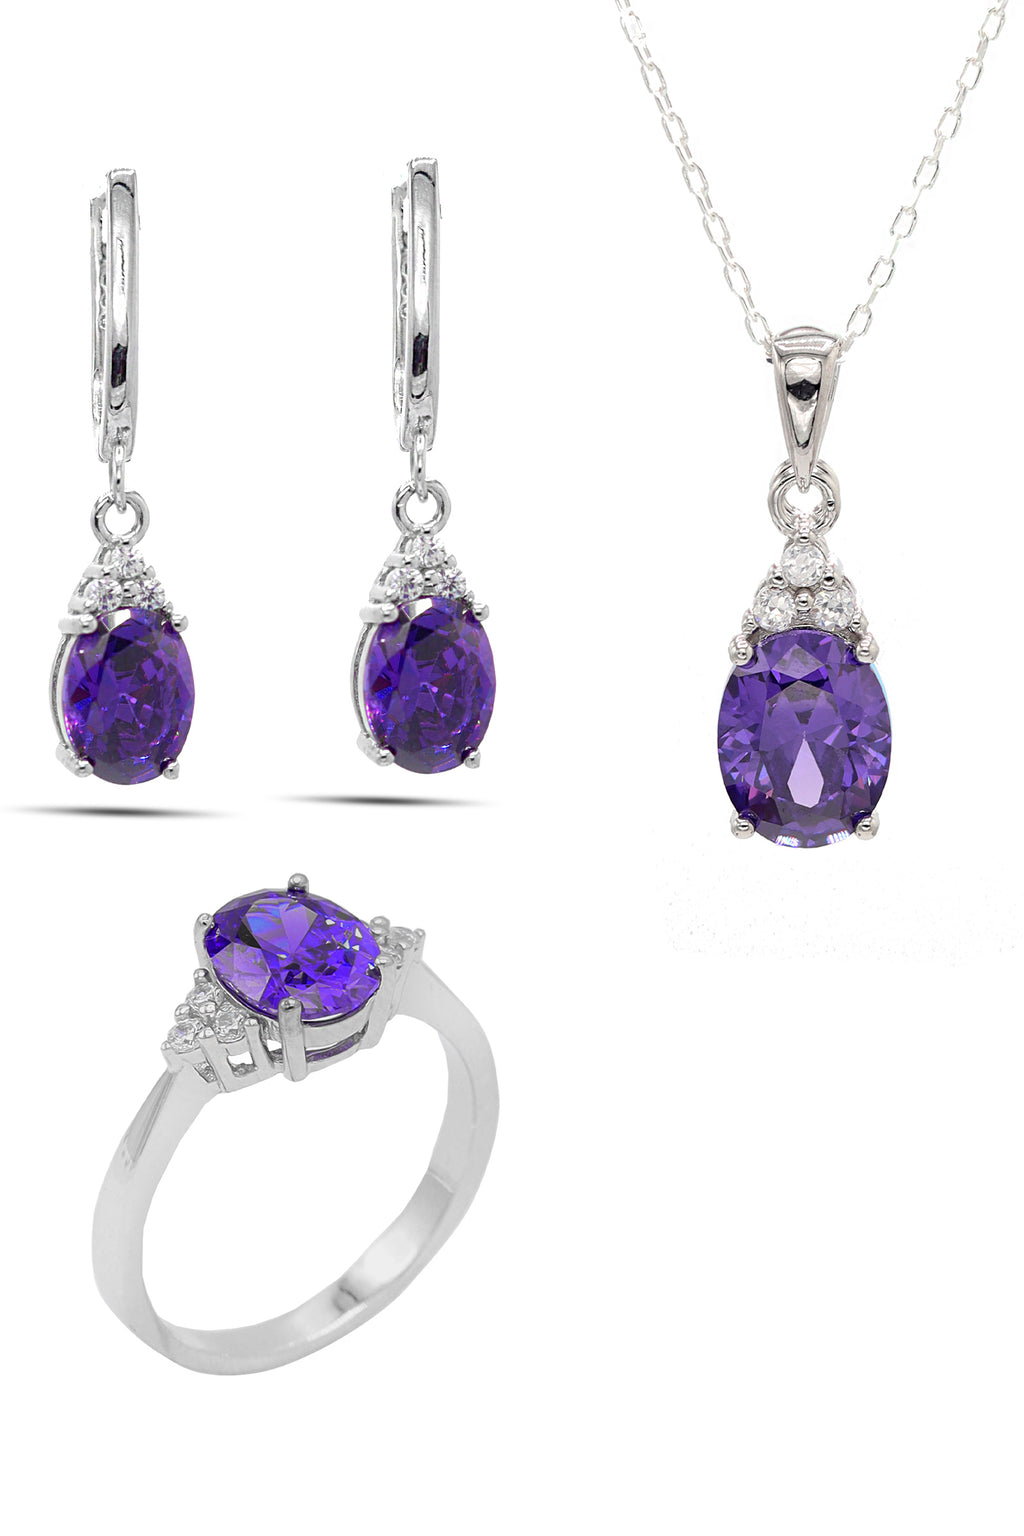 Oval Model Silver Triple Jewelry Set With Amethyst (NG201021905)